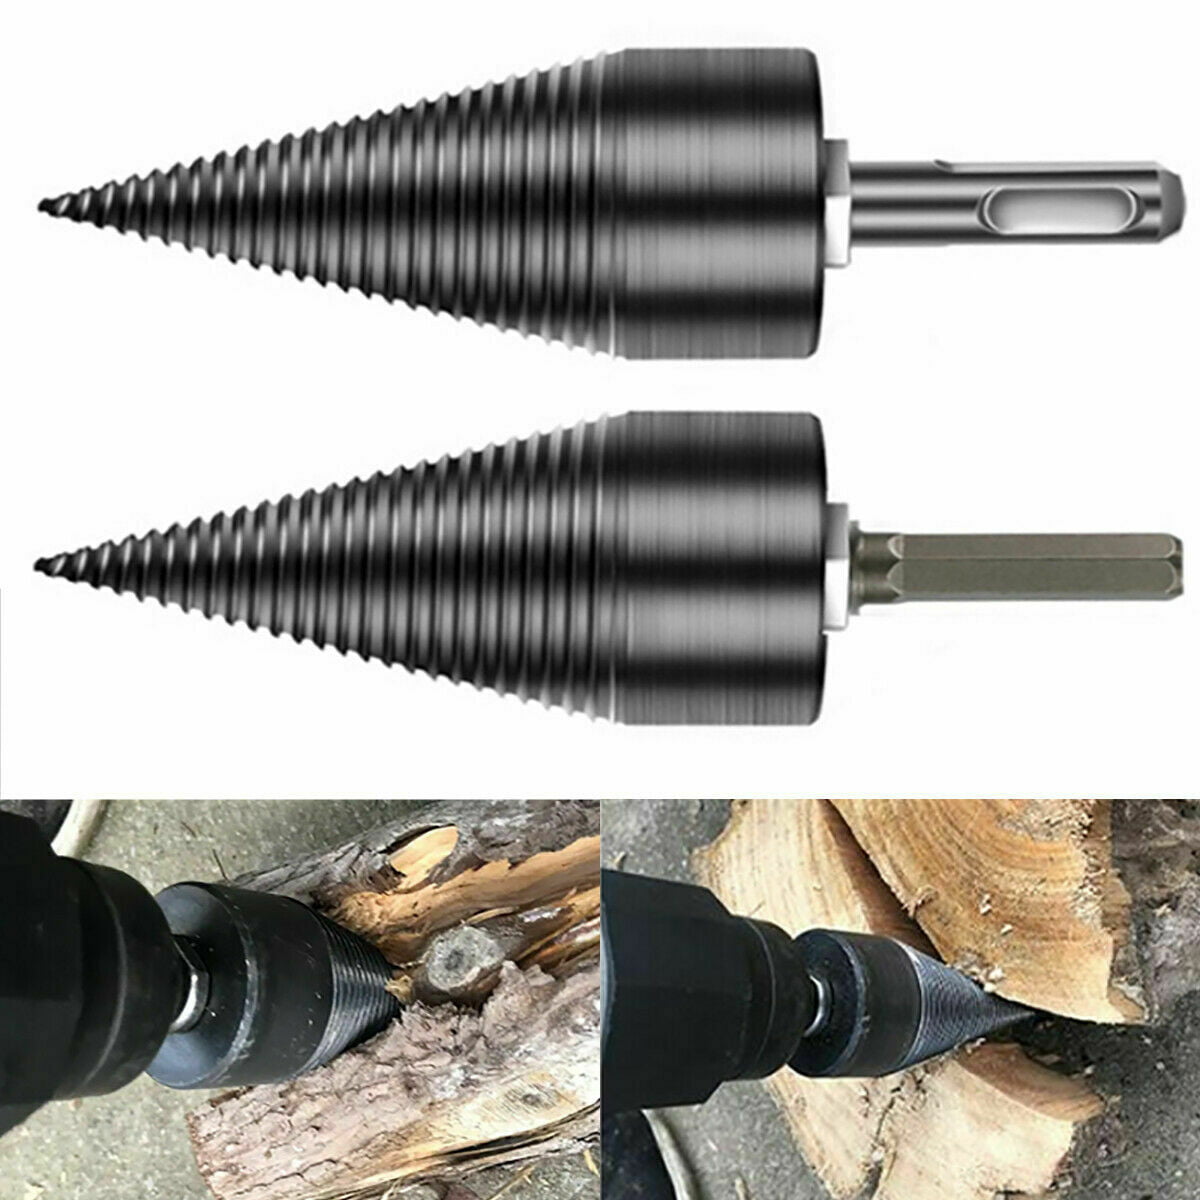 Firewood Log Splitter Drill Bit Removable Wood Splitter Drill Bits Drill Screw Cone Driver Portable Wood Cutting Tool for Hand Drill Wood Cutting Supplies Round Shank 